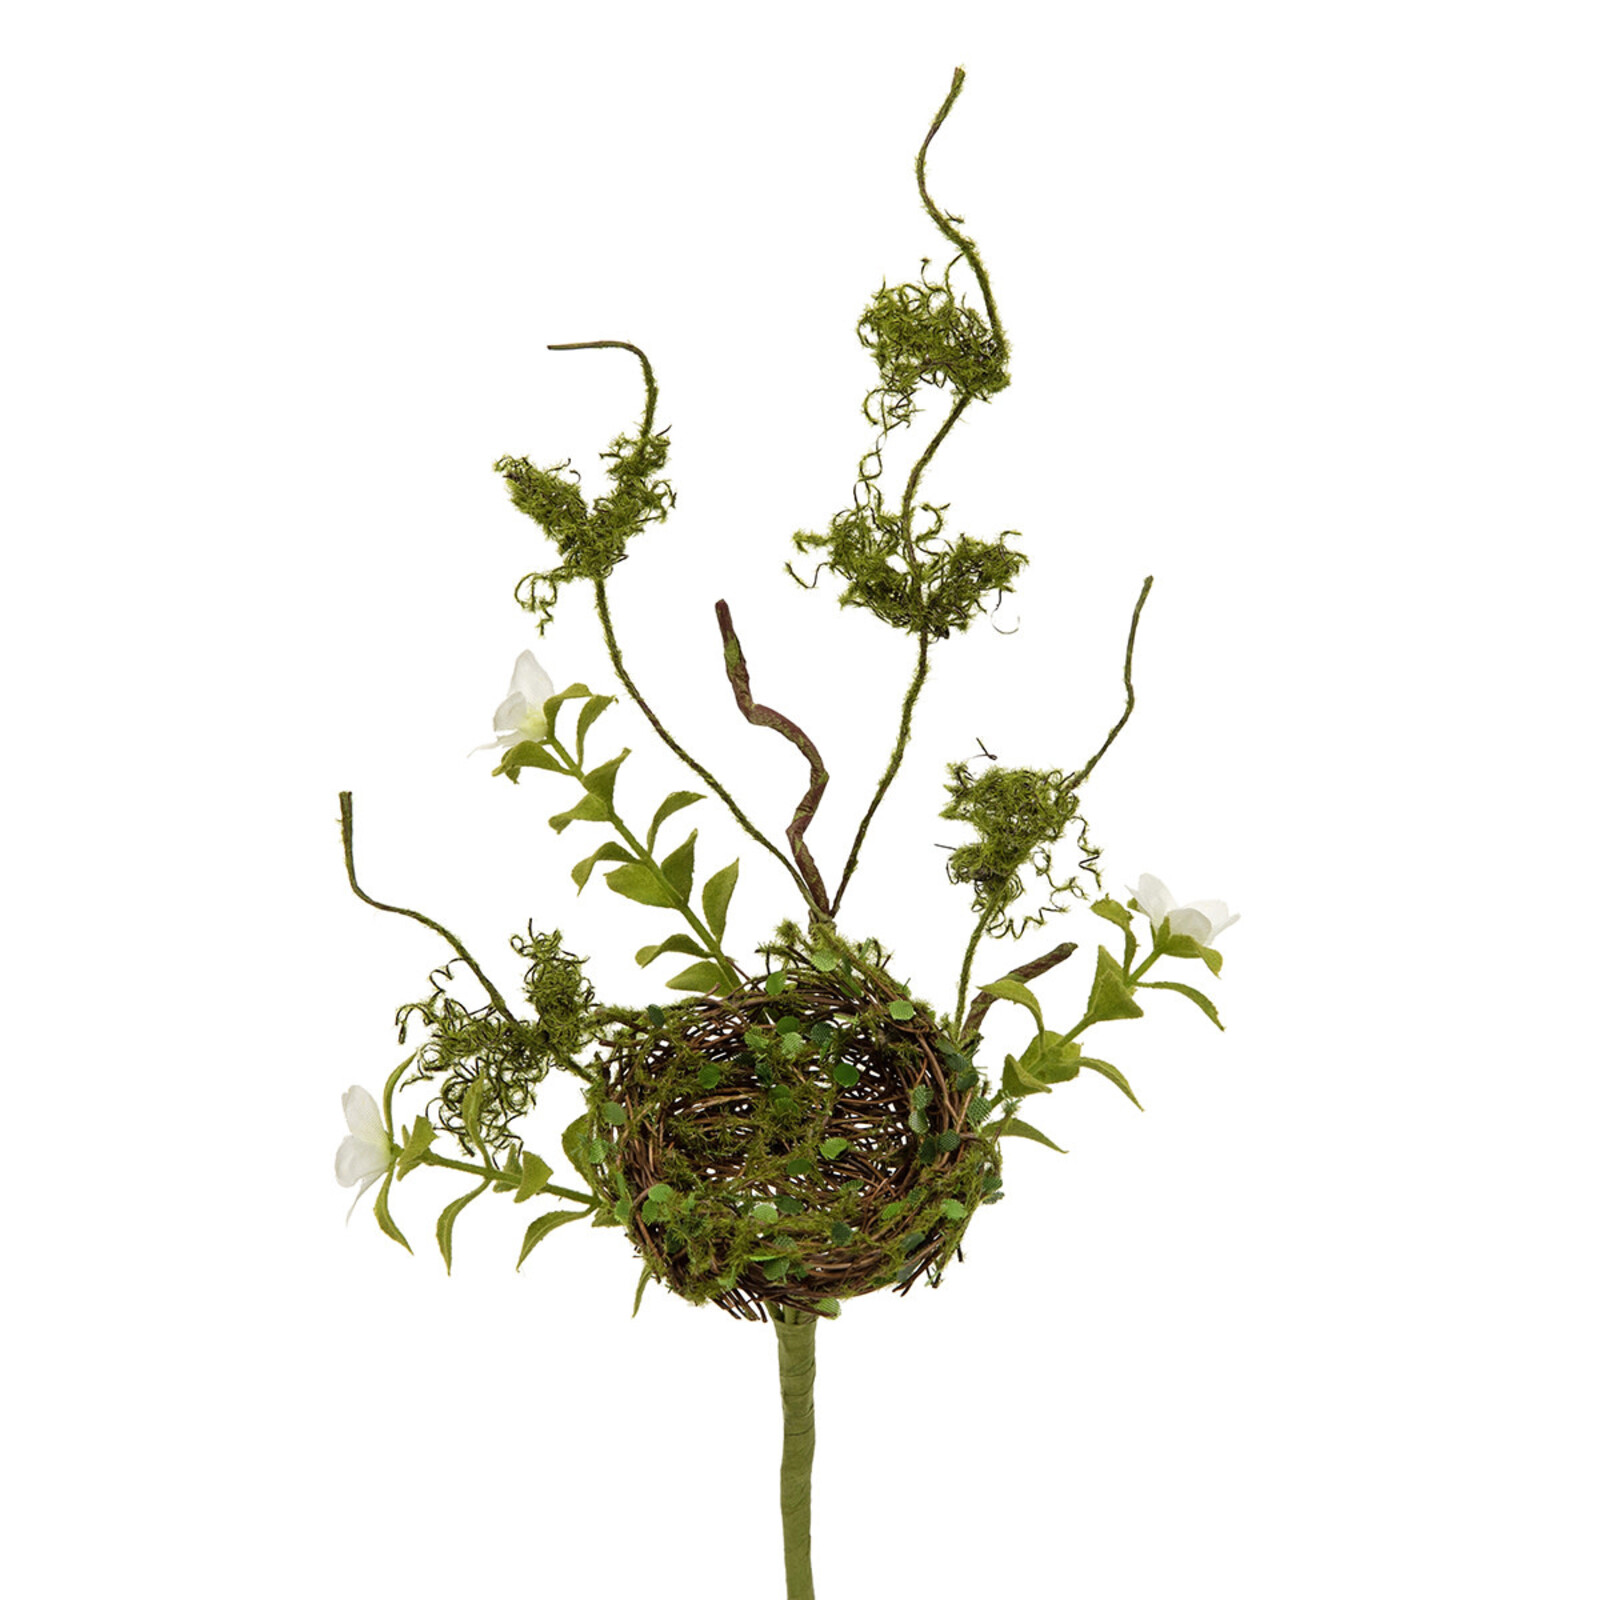 Meravic PIK FAUX MOSS AND WIRED TWIG  WITH FERNS  M1543 loading=